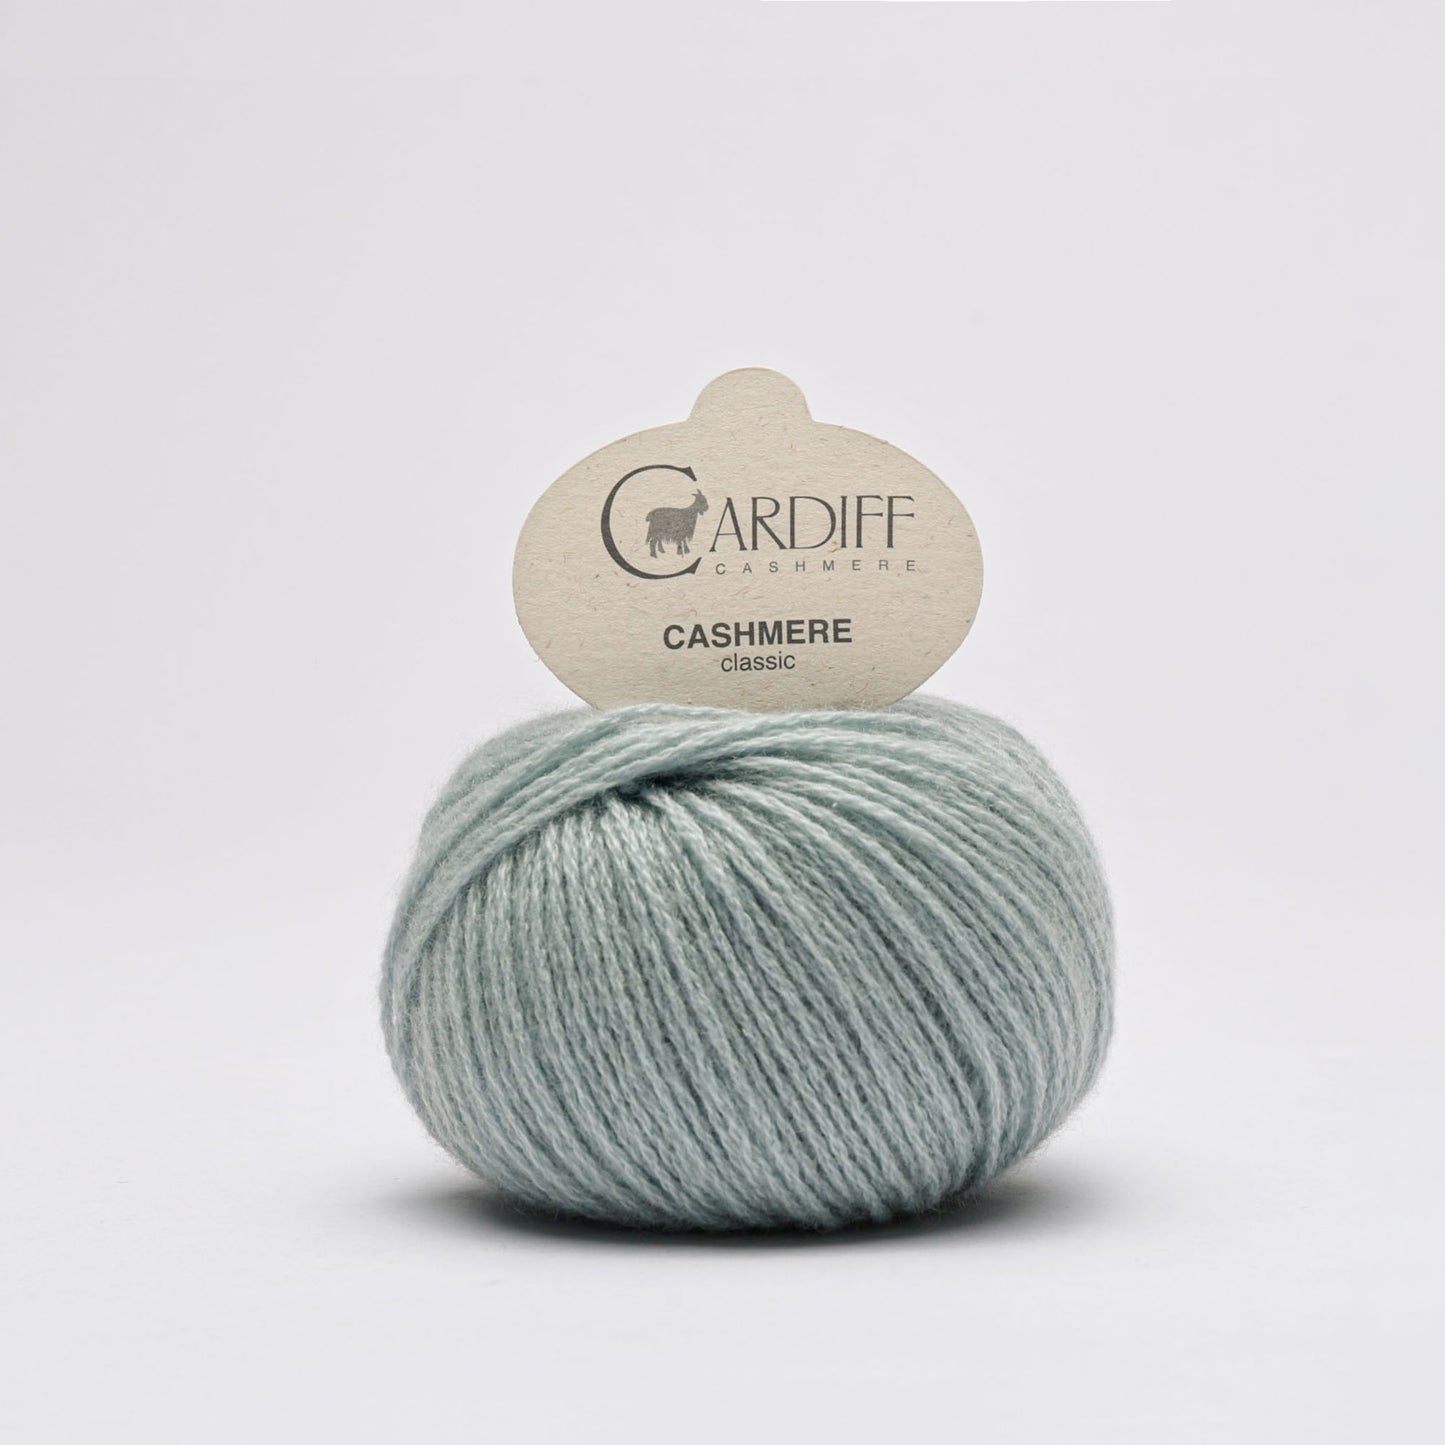 Cardiff CLASSIC gentle yarn, 677, MOSE, comp: 100% Cashmere